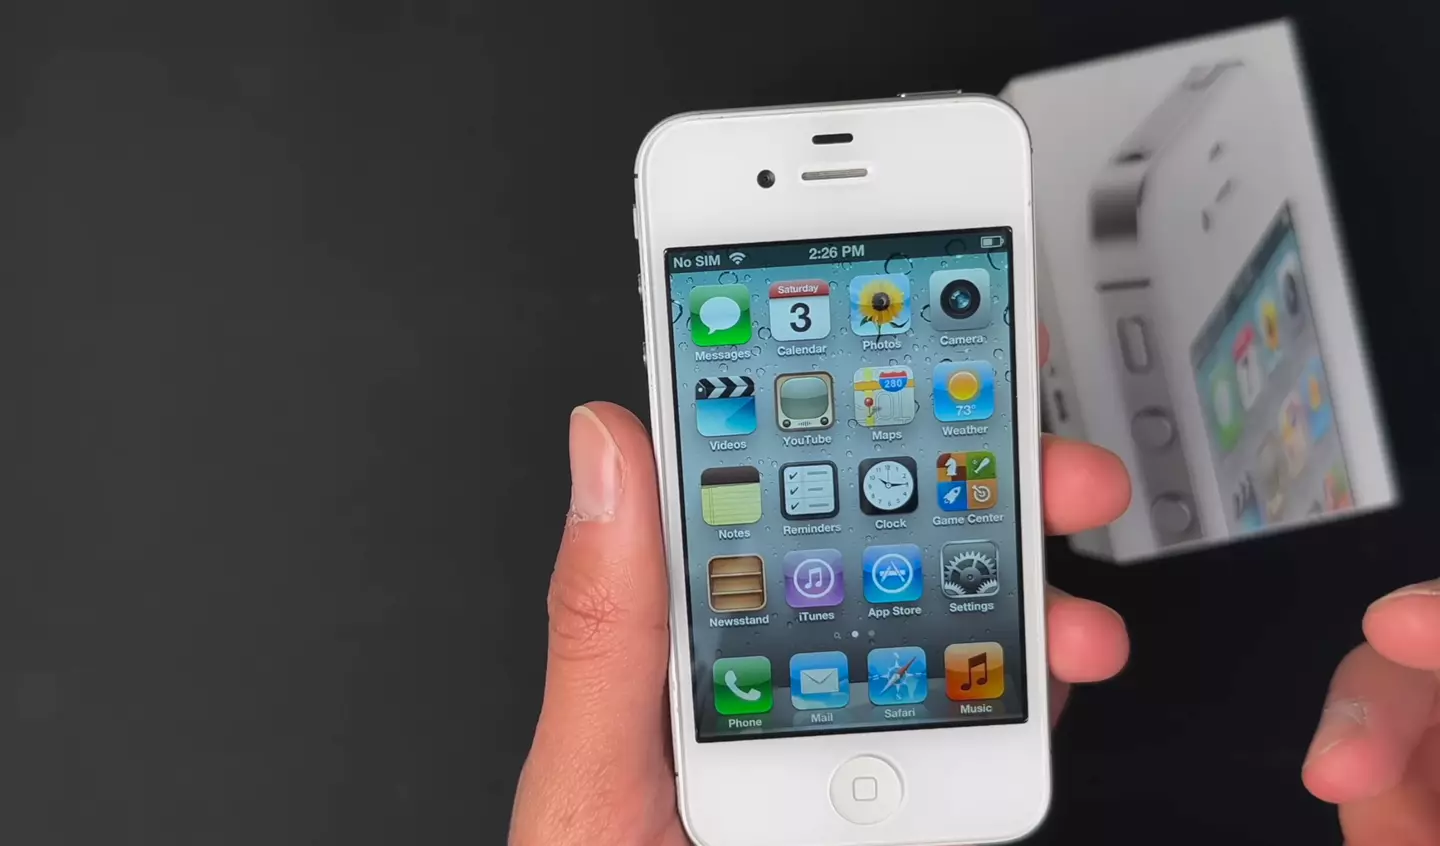 People think the iPhone 4s will never be beaten.